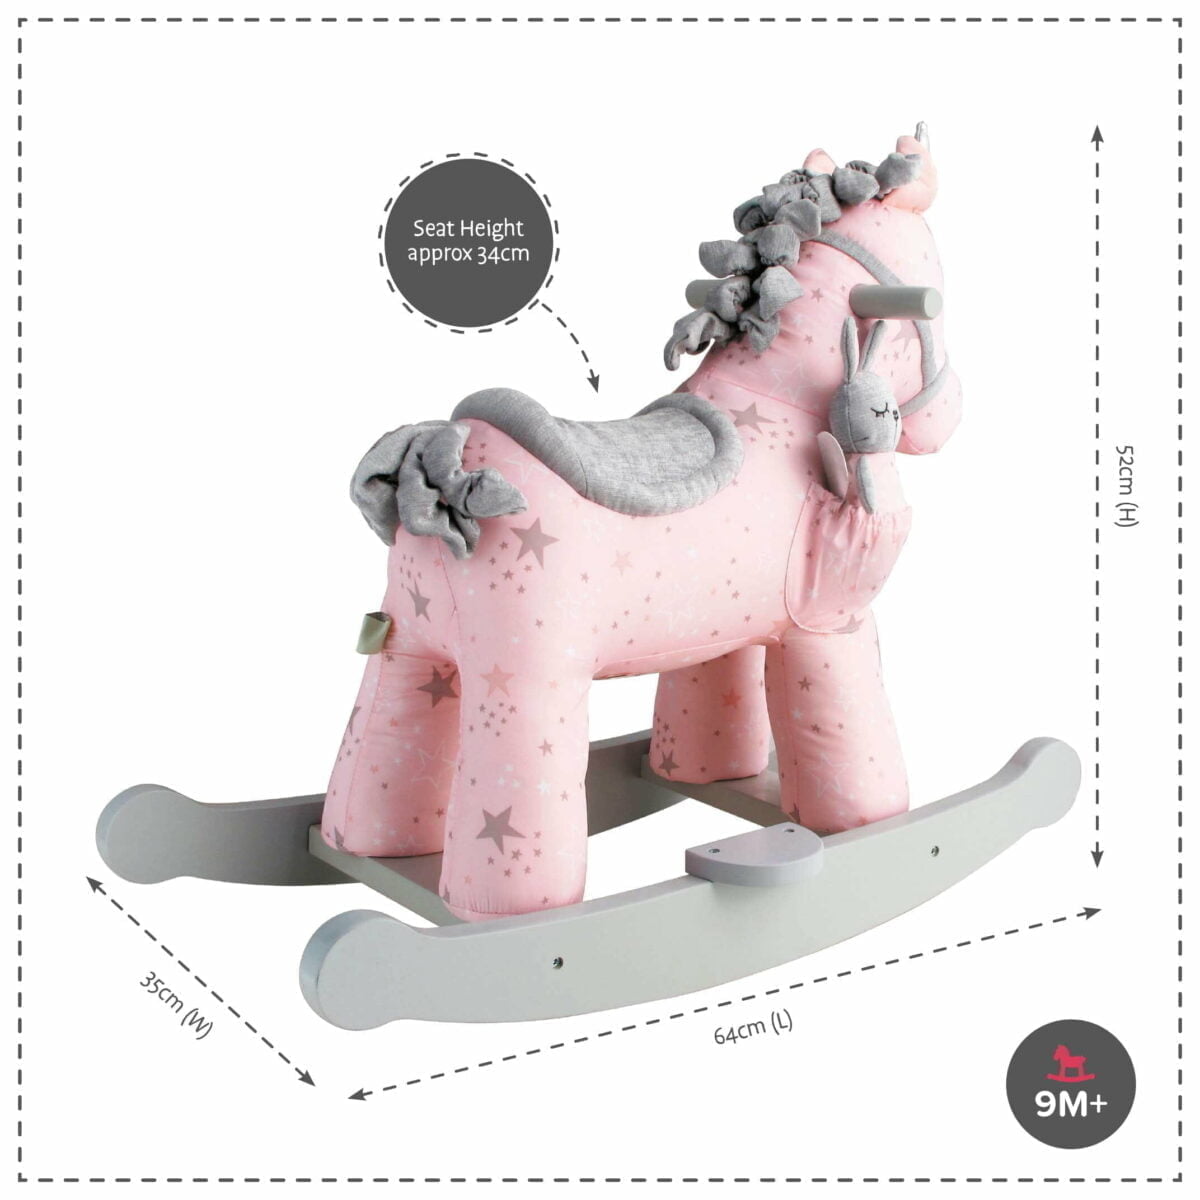 Product dimensions displayed for Celeste & Fae Rocking Unicorn 9m+